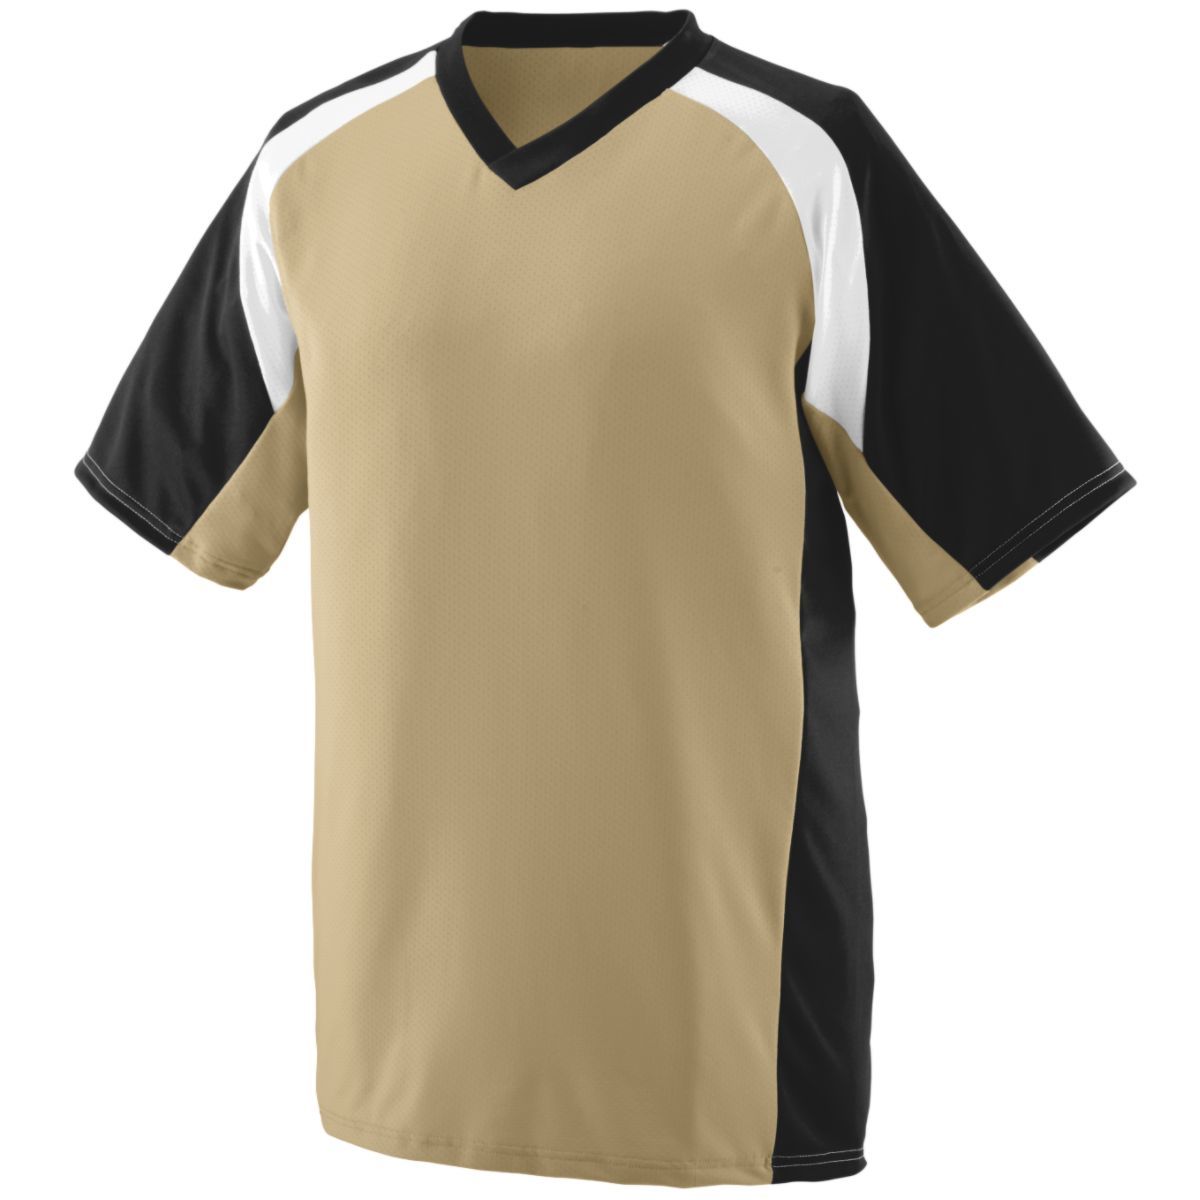 Augusta Sportswear Youth Nitro Jersey in Vegas Gold/Black/White  -Part of the Youth, Youth-Jersey, Augusta-Products, Football, Shirts, All-Sports, All-Sports-1 product lines at KanaleyCreations.com